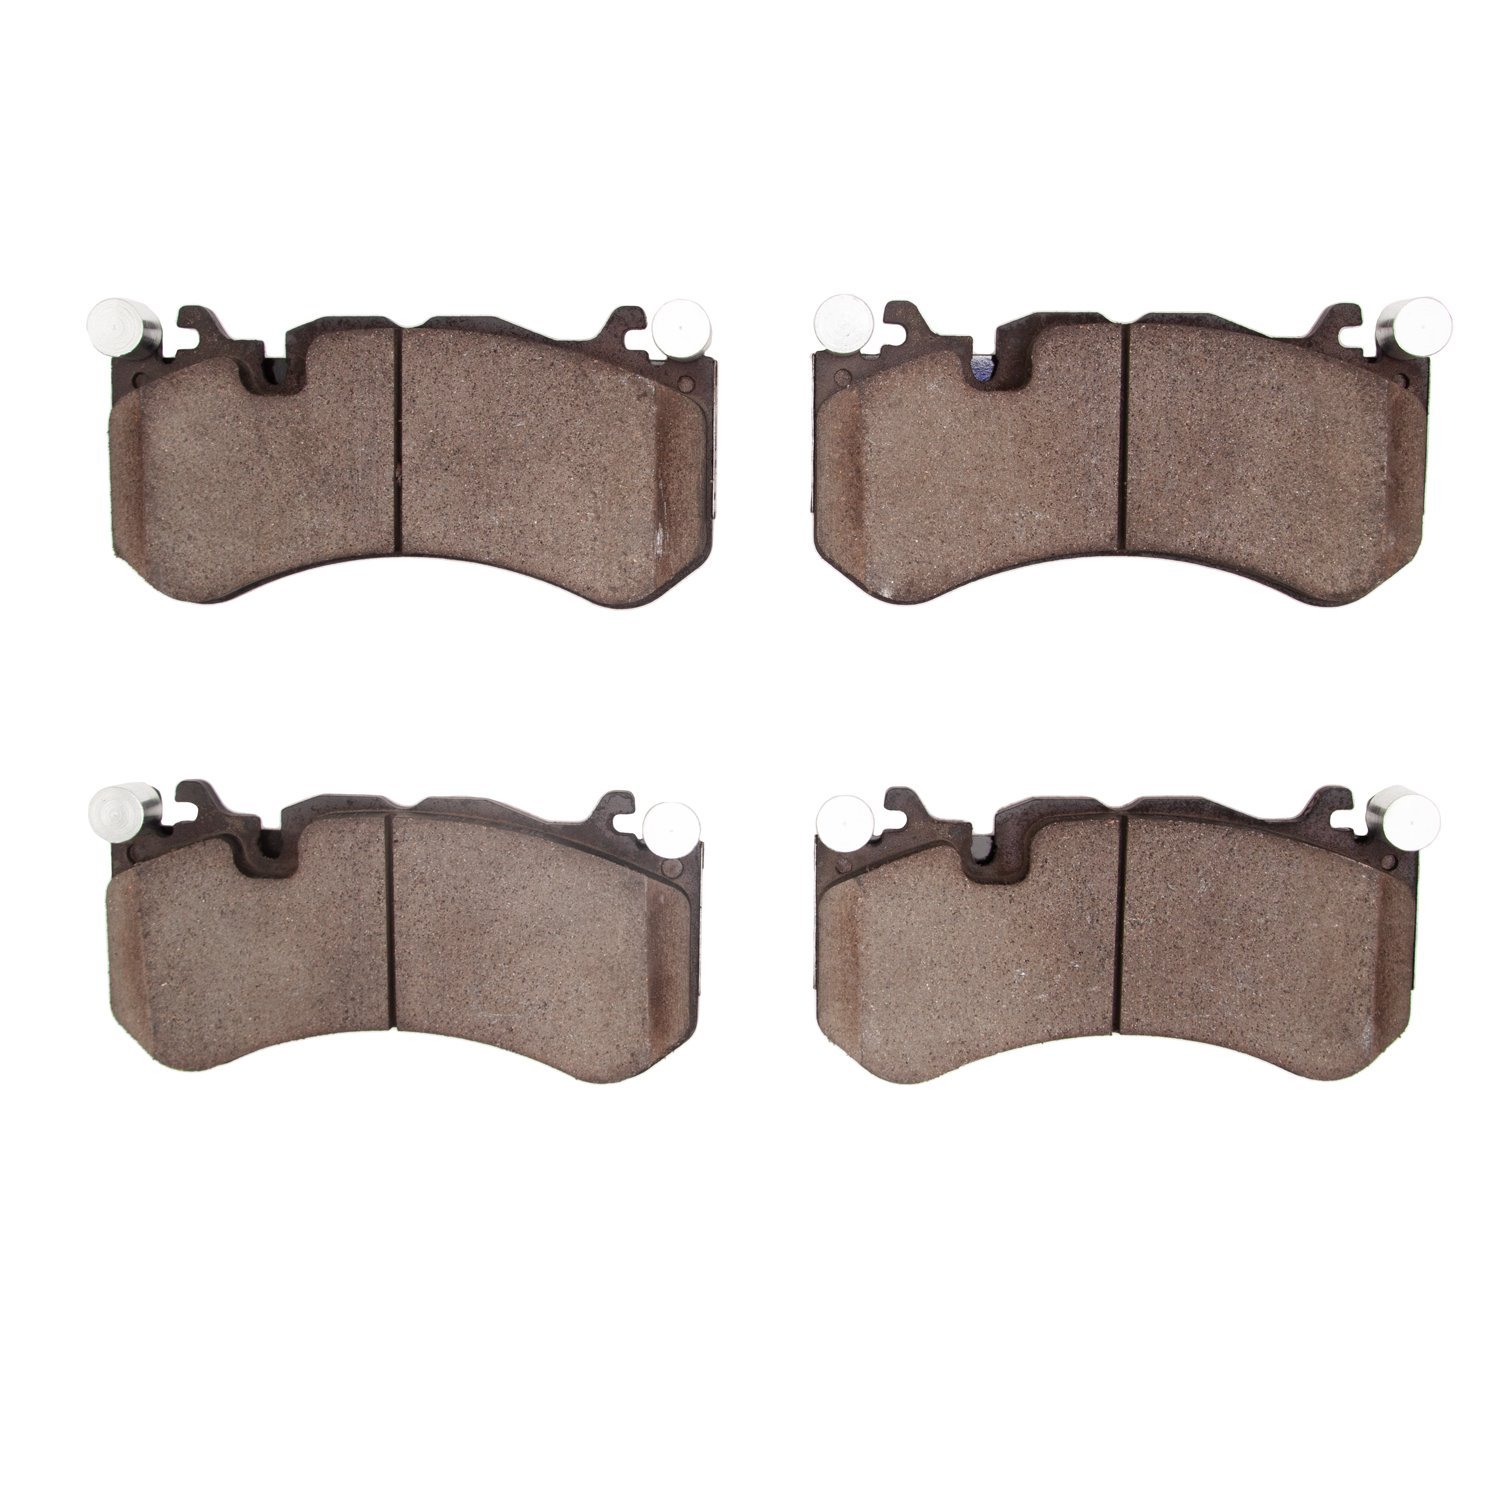 1552-1291-00 5000 Advanced Low-Metallic Brake Pads, Fits Select Mercedes-Benz, Position: Front